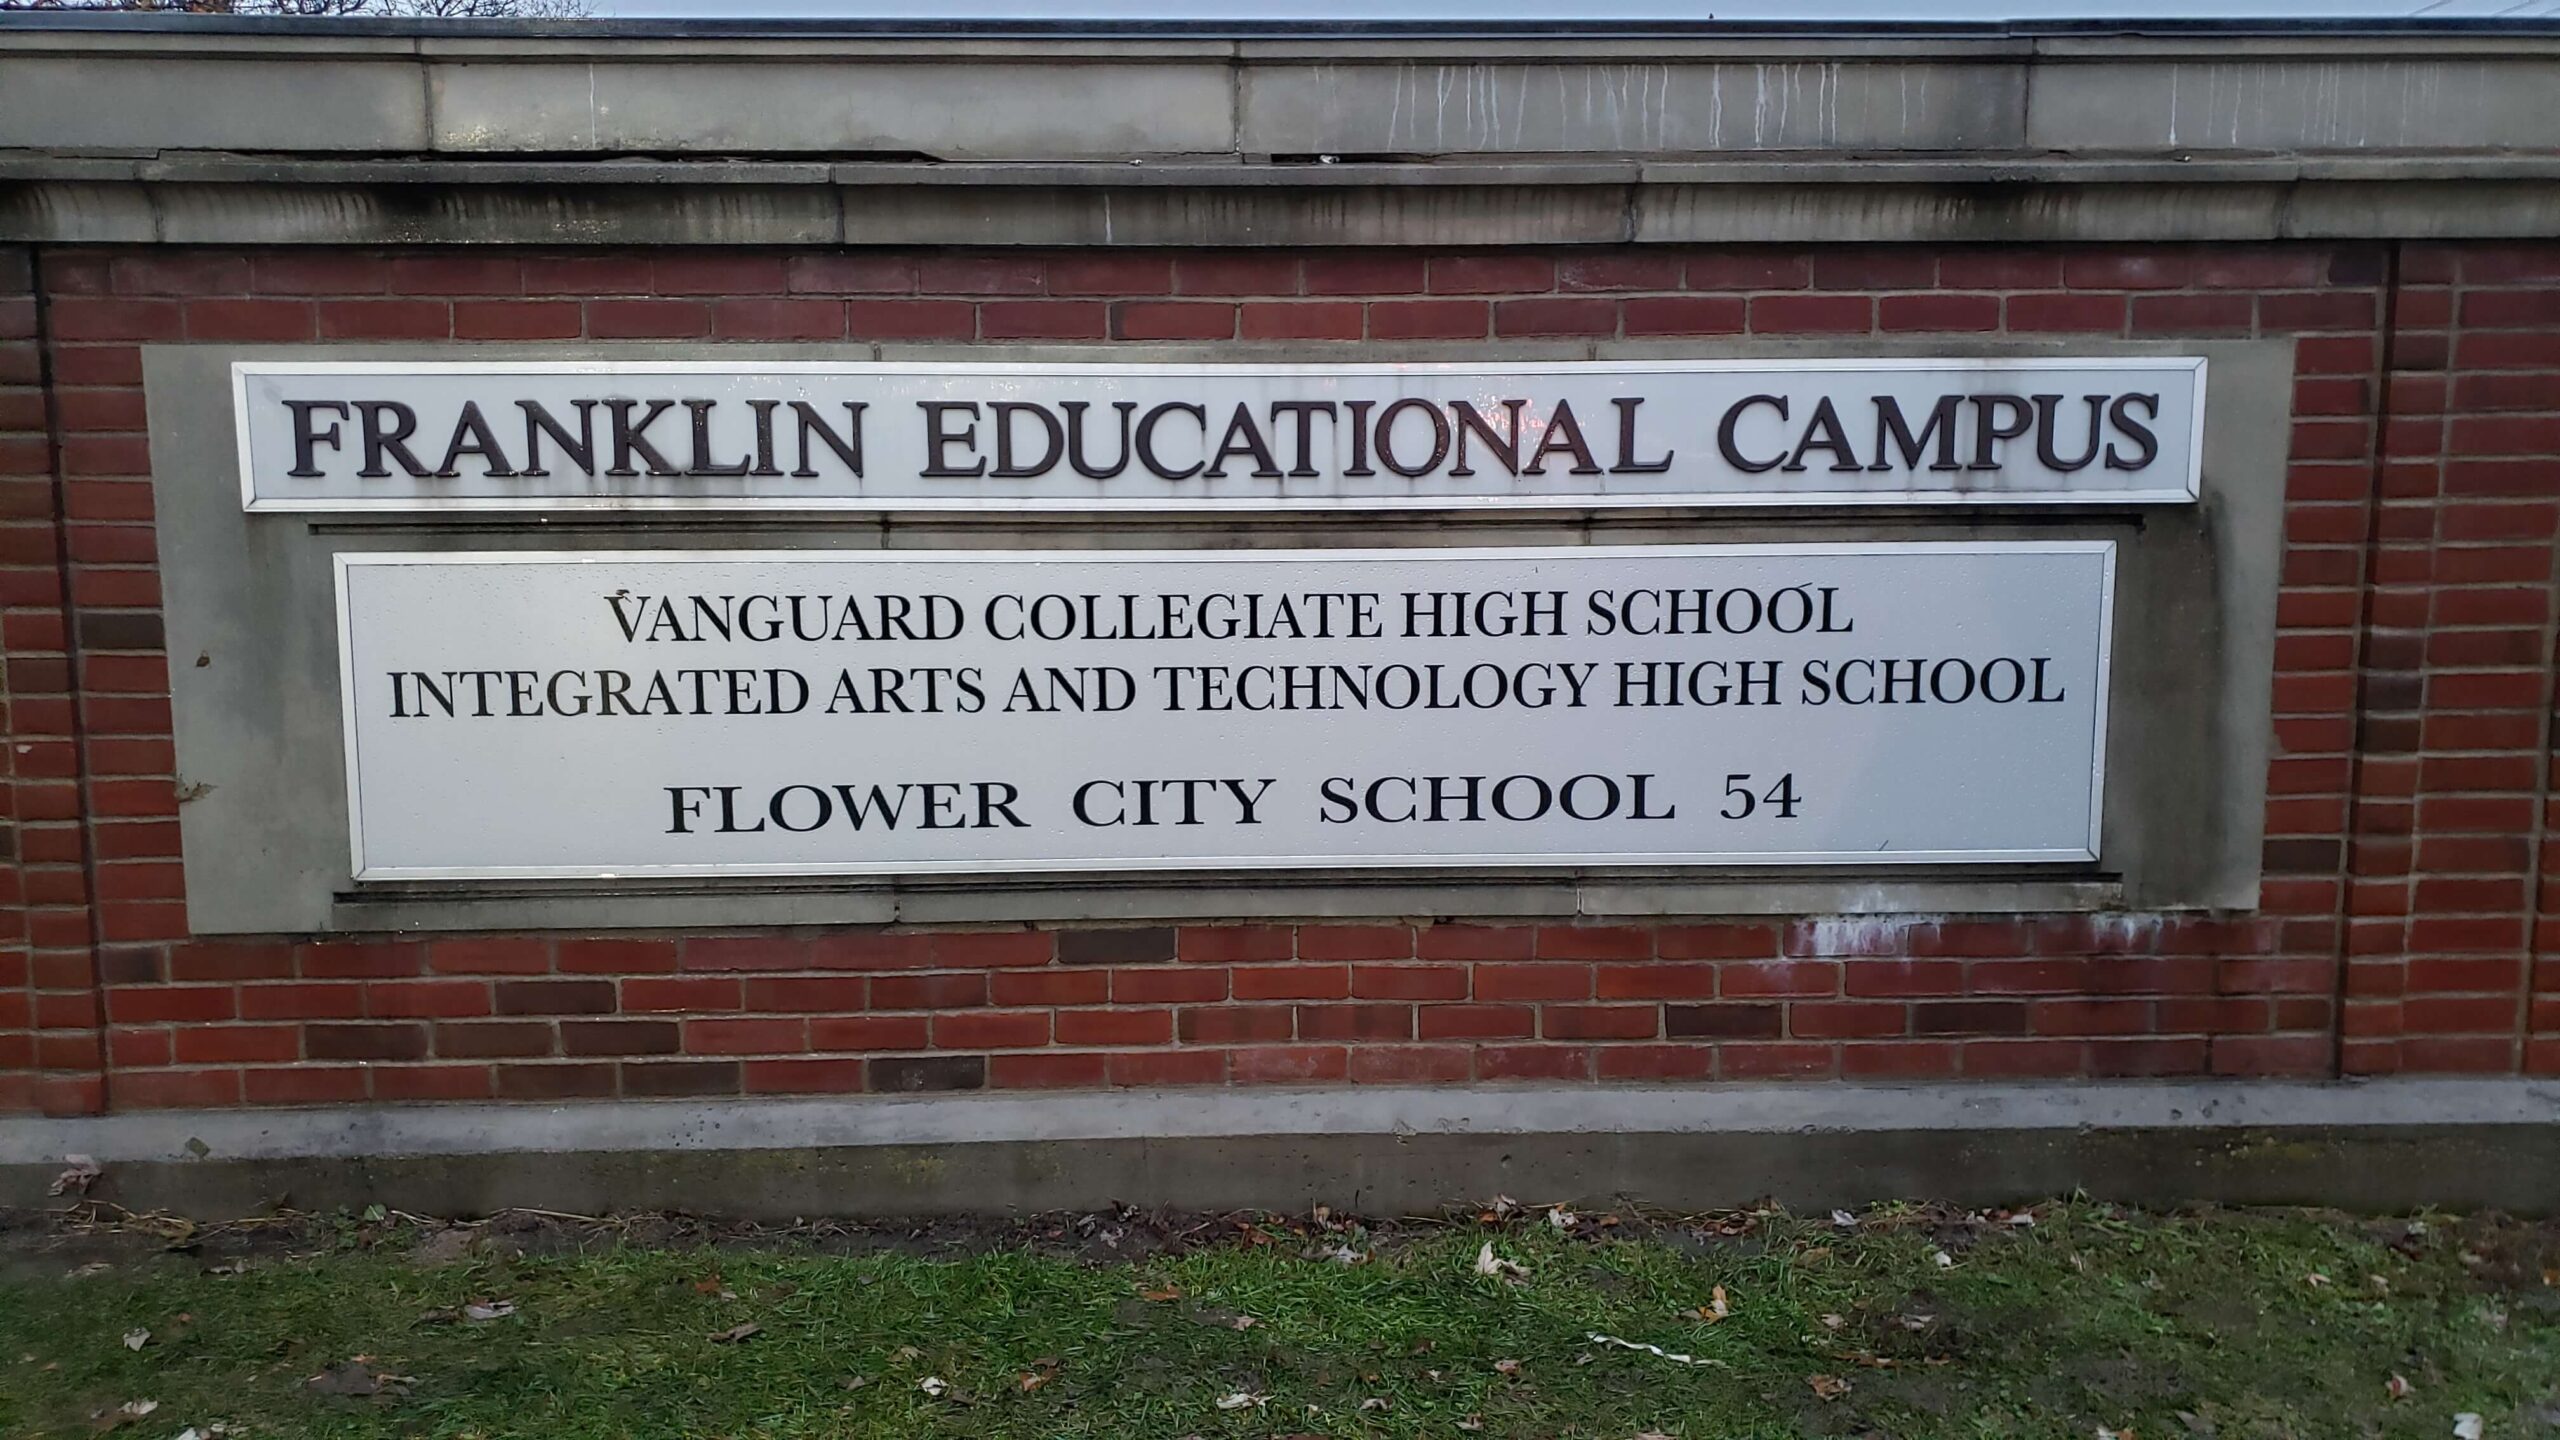 Franklin Educational Campus Flower City School brick wall monument sign